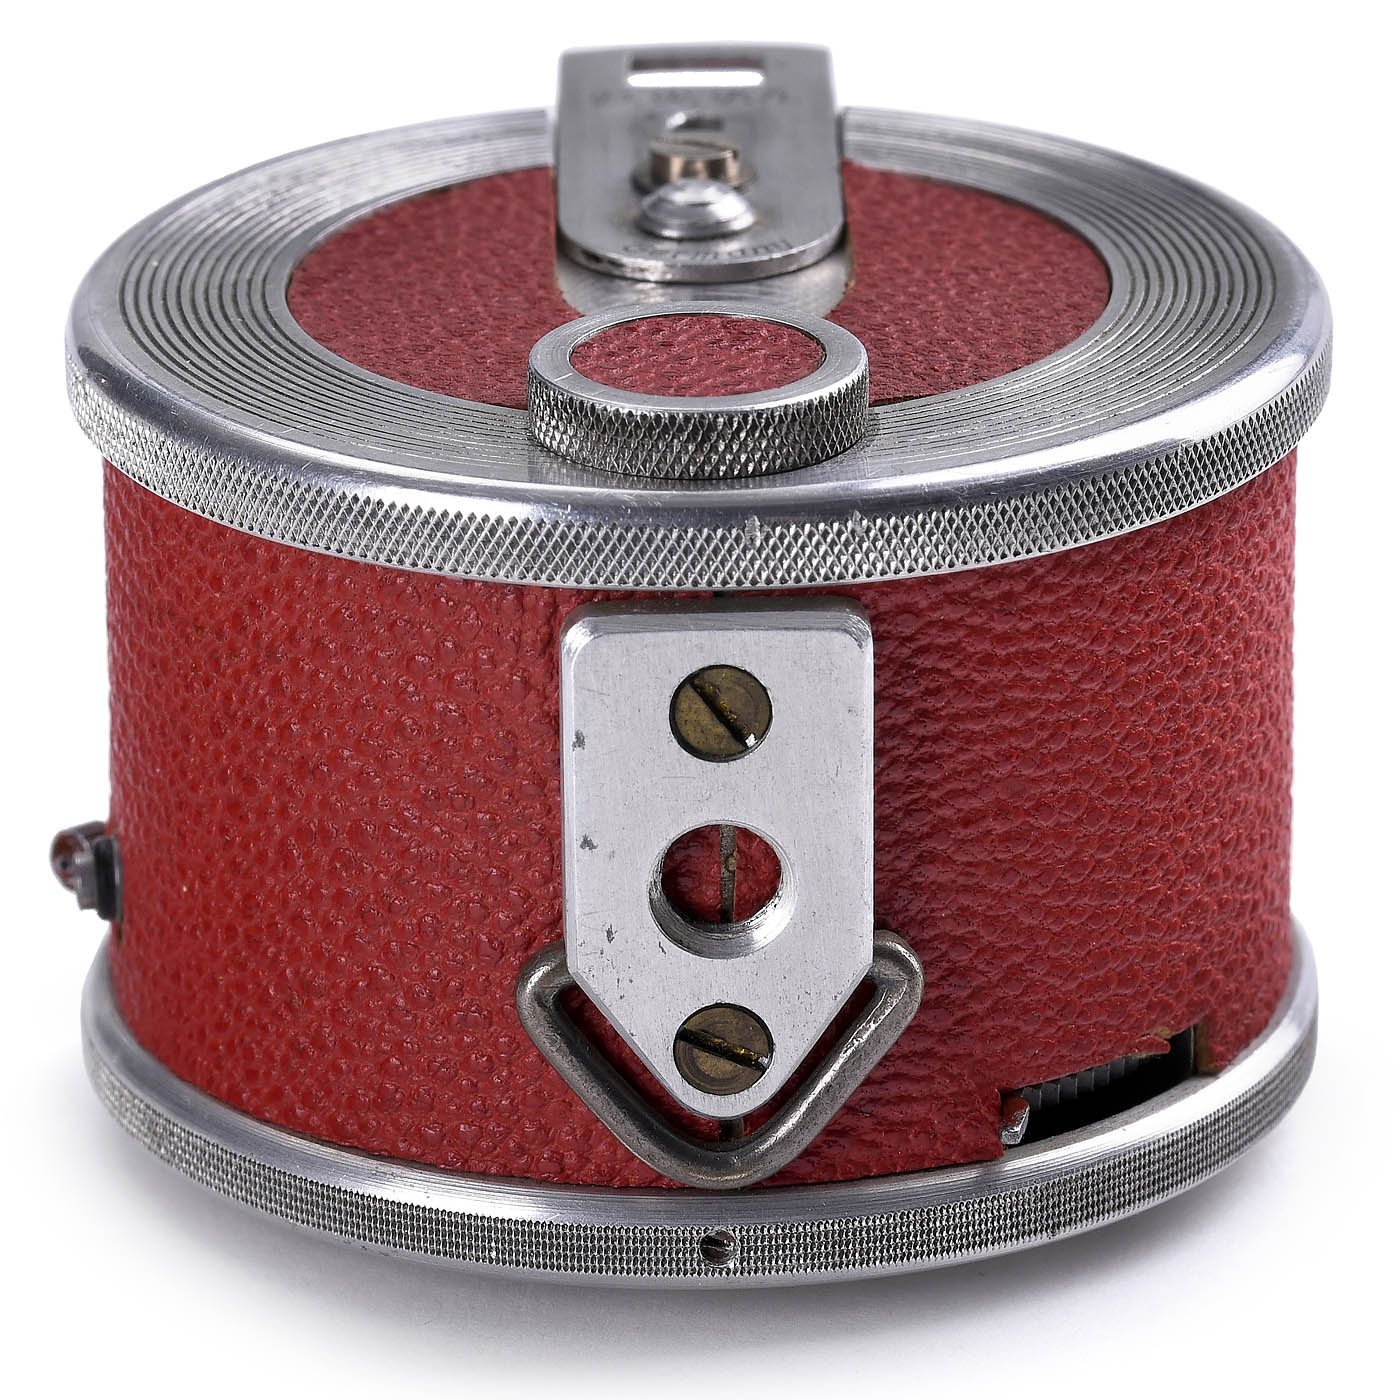 Fotal (Red) Miniature Camera, c. 1955 - Image 4 of 5